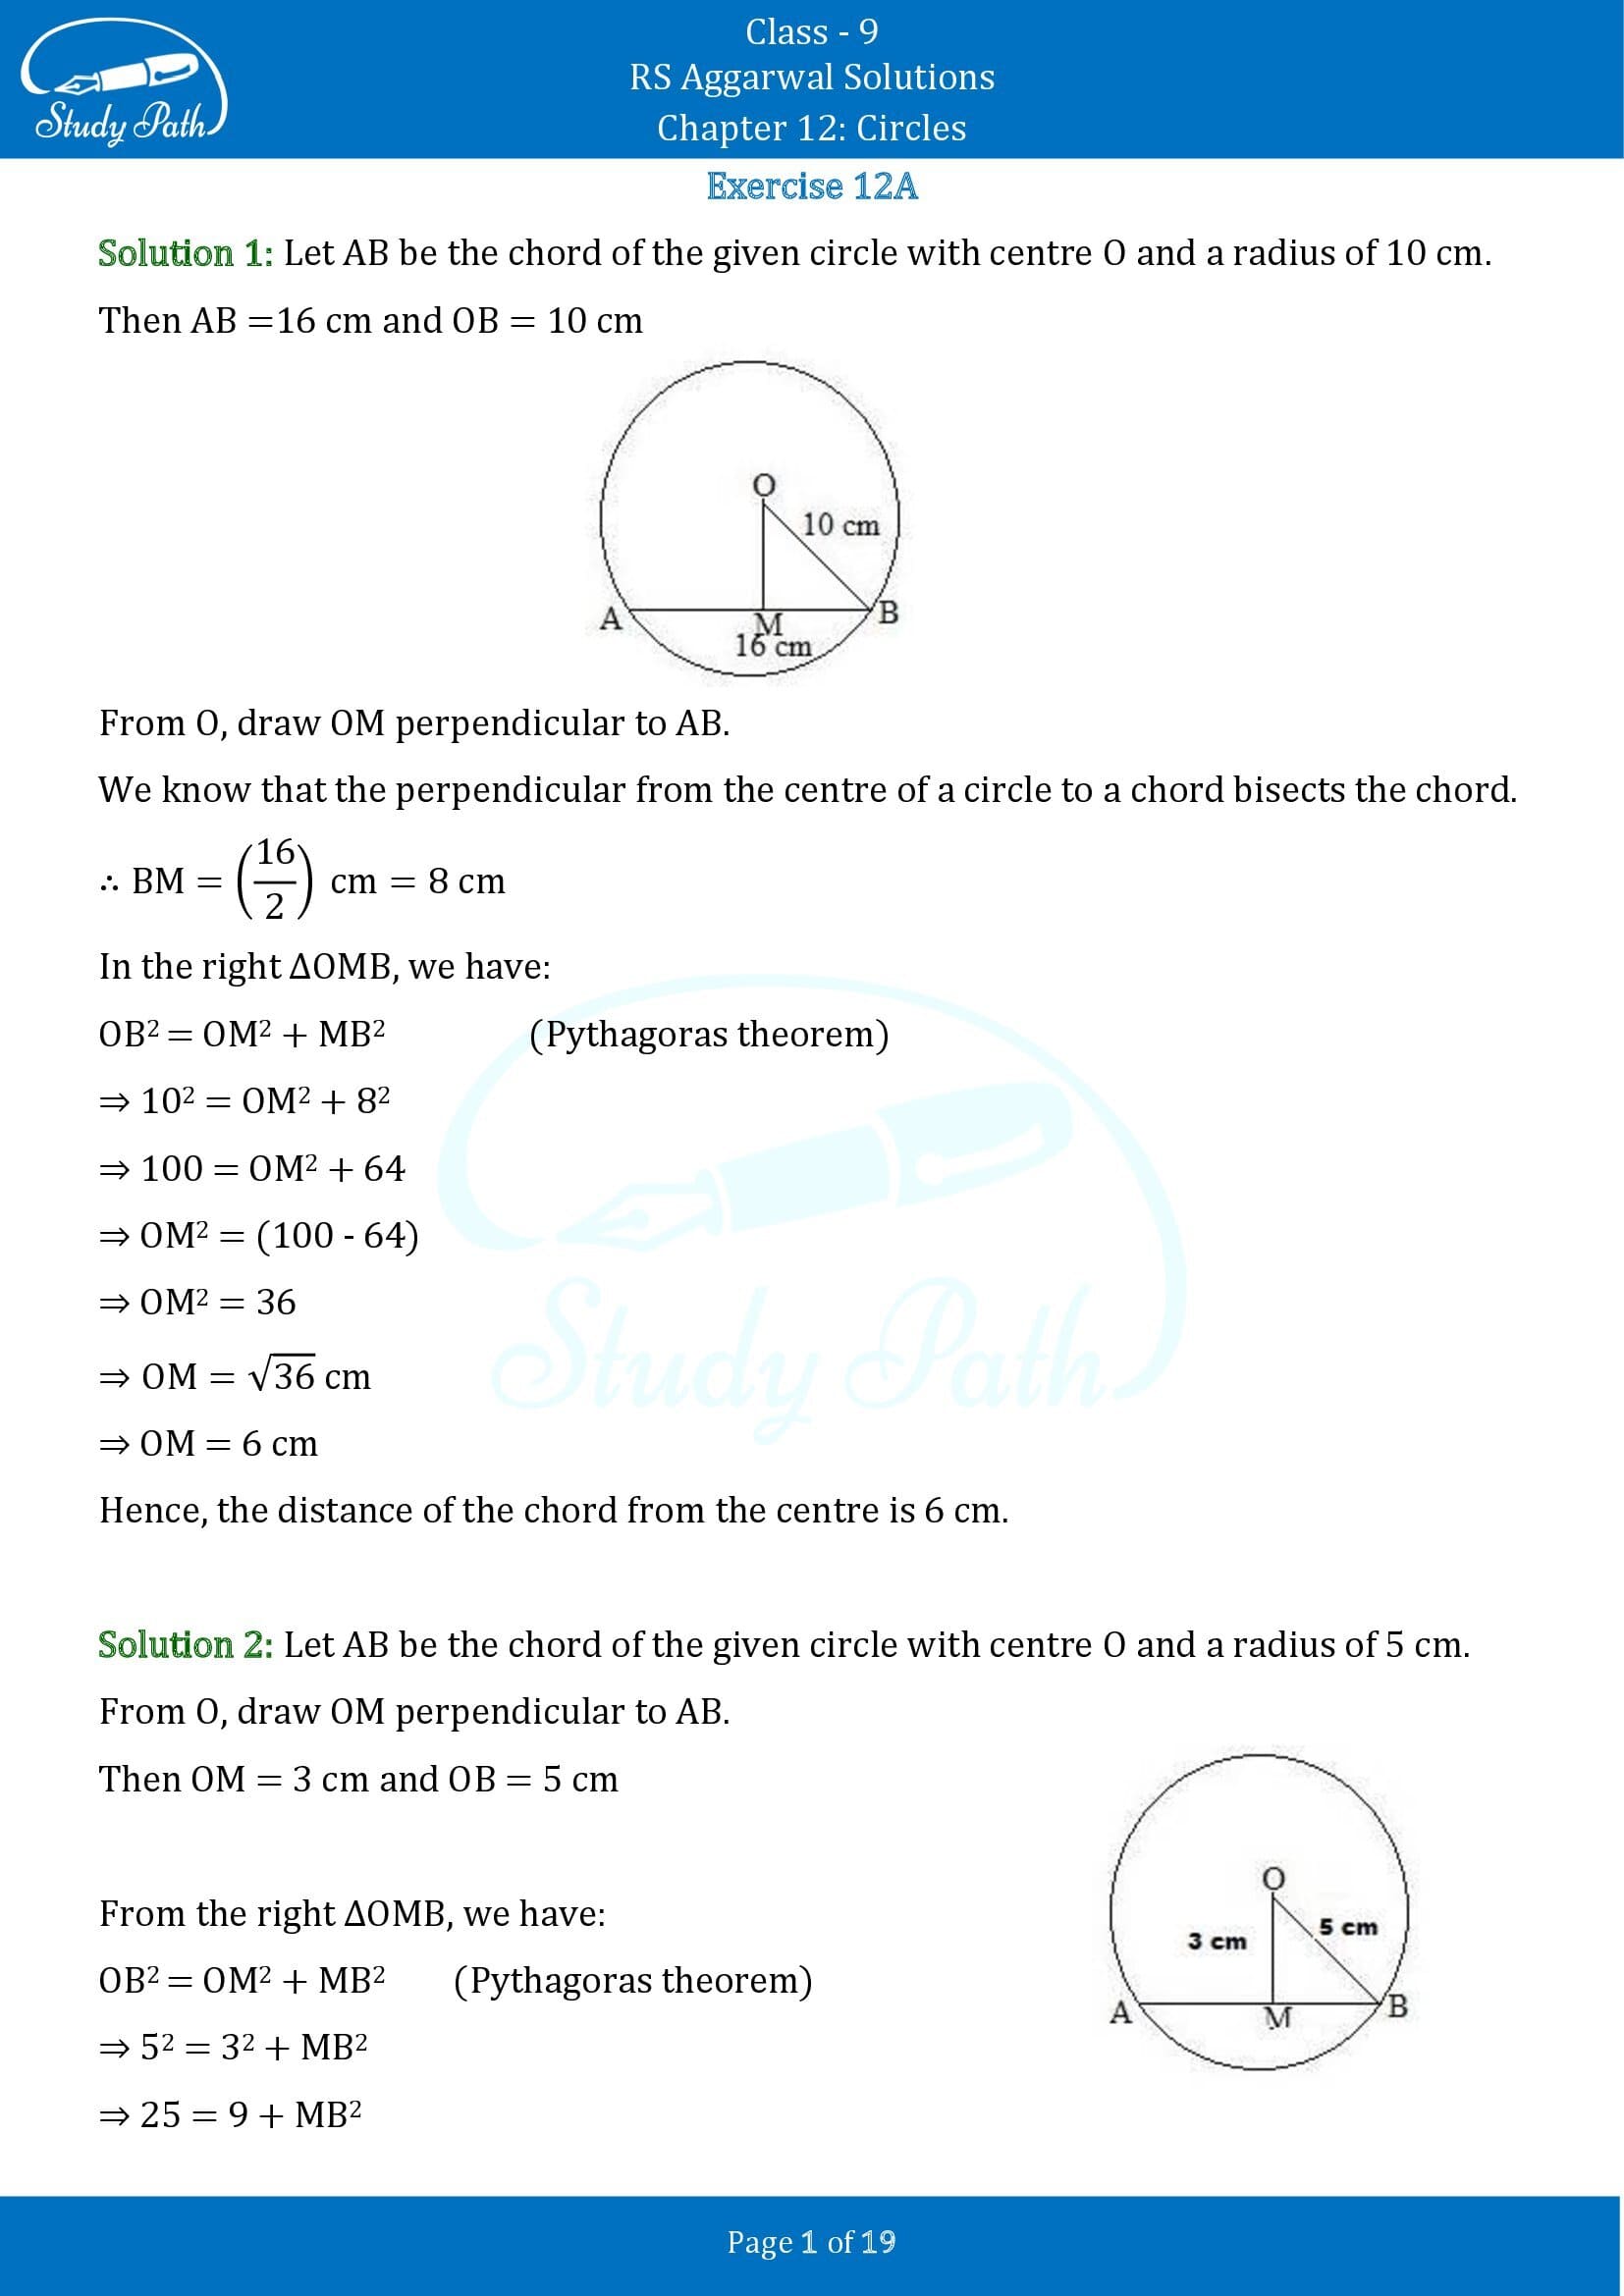 RS Aggarwal Solutions Class 9 Chapter 12 Circles Exercise 12A 00001